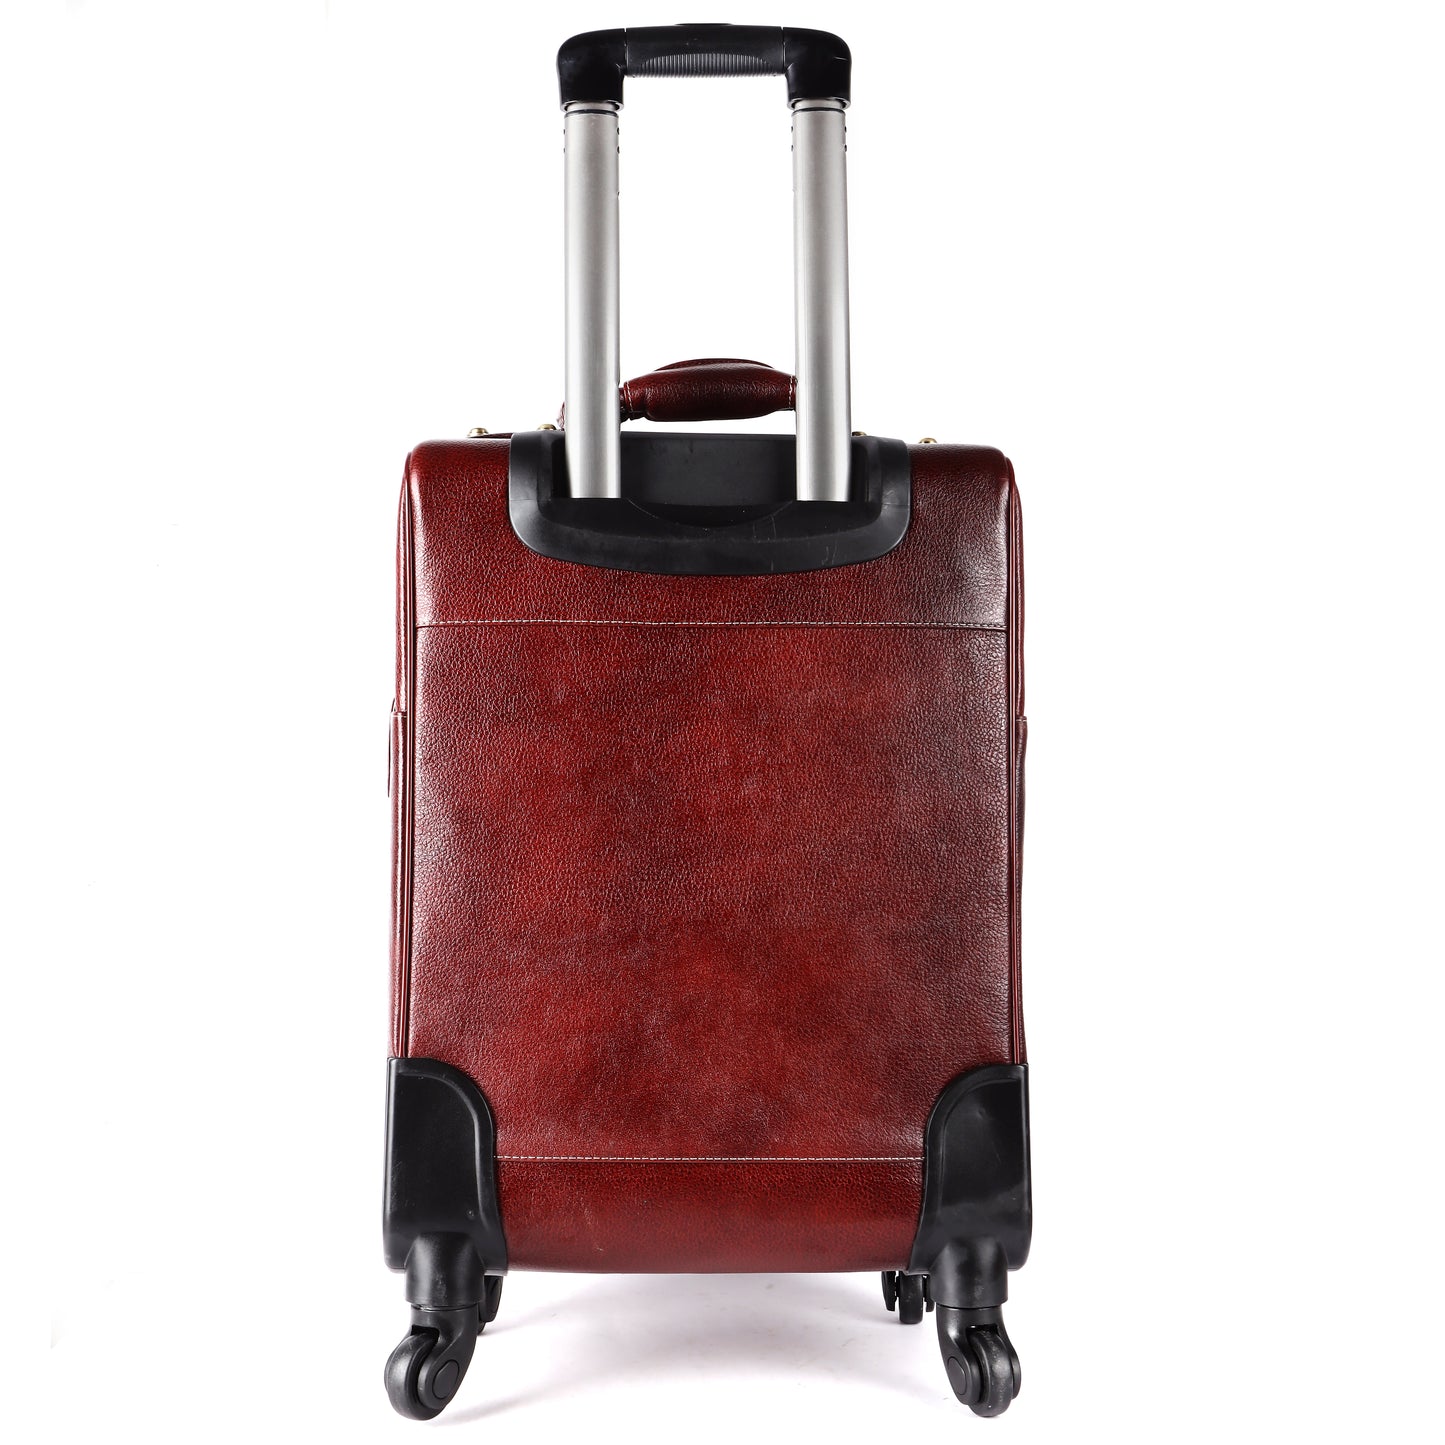 Premium Leather Trolley Bag Airport Cabin Bag Leather Weekender Leather Luggage with Wheels Gift For Him Tourist Luggage